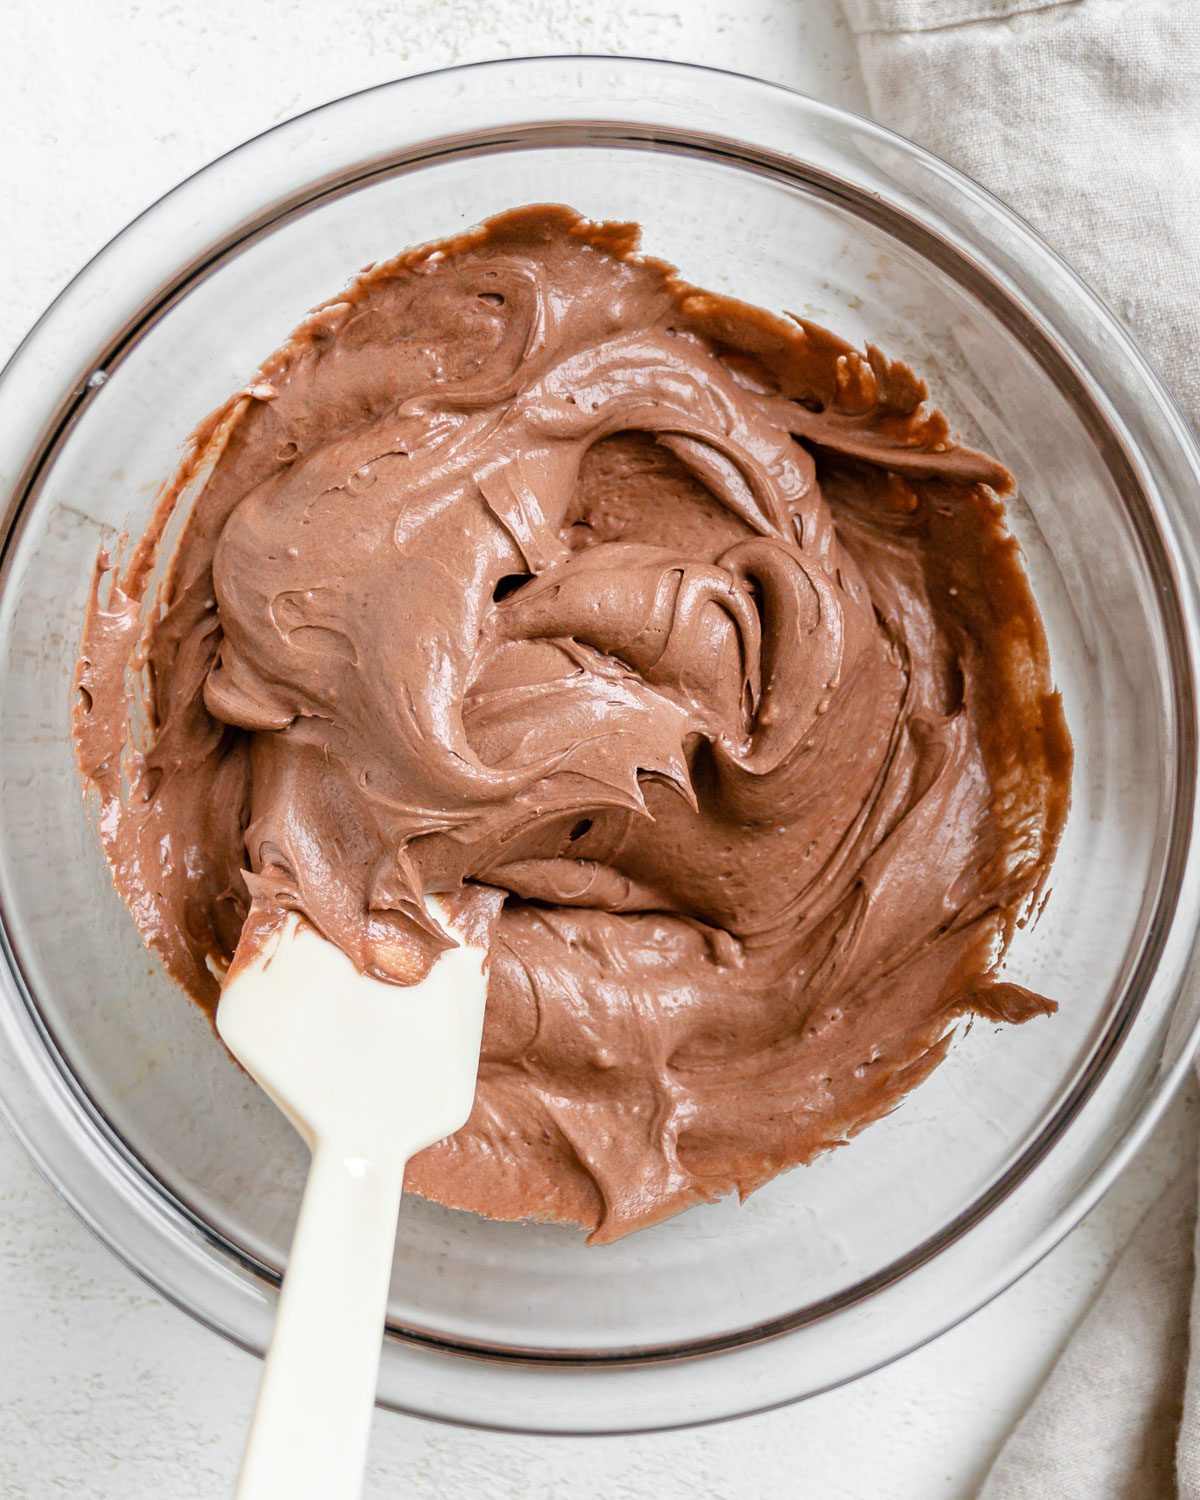 completed Vegan Chocolate Frosting in a bowl against a white background